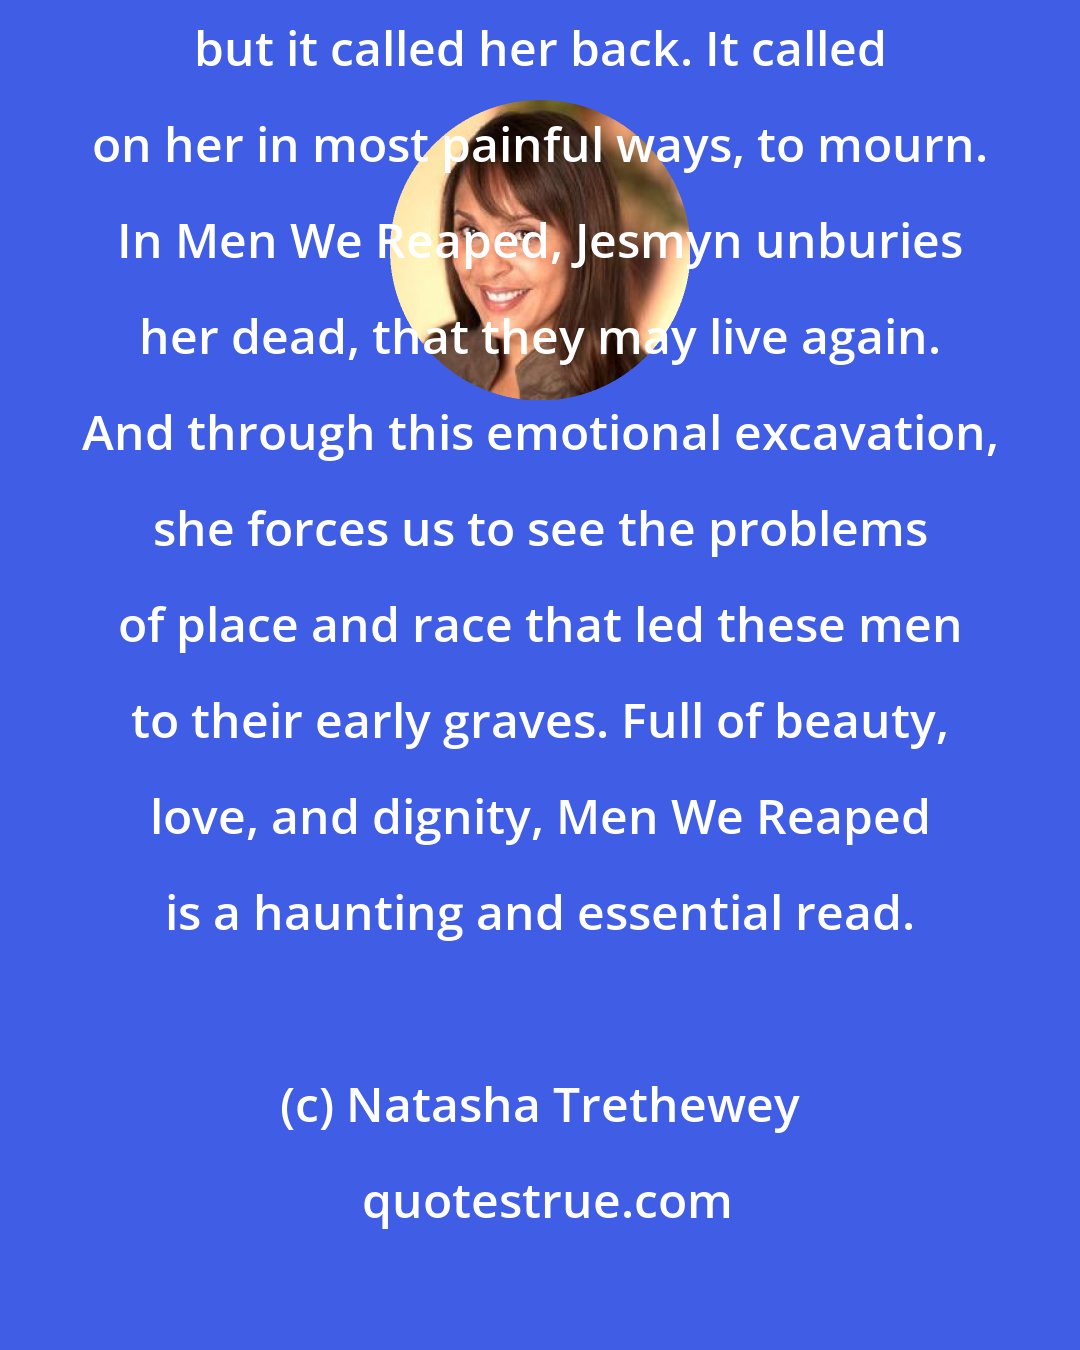 Natasha Trethewey: Jesmyn Ward left her Gulf Coast home for education and experience, but it called her back. It called on her in most painful ways, to mourn. In Men We Reaped, Jesmyn unburies her dead, that they may live again. And through this emotional excavation, she forces us to see the problems of place and race that led these men to their early graves. Full of beauty, love, and dignity, Men We Reaped is a haunting and essential read.